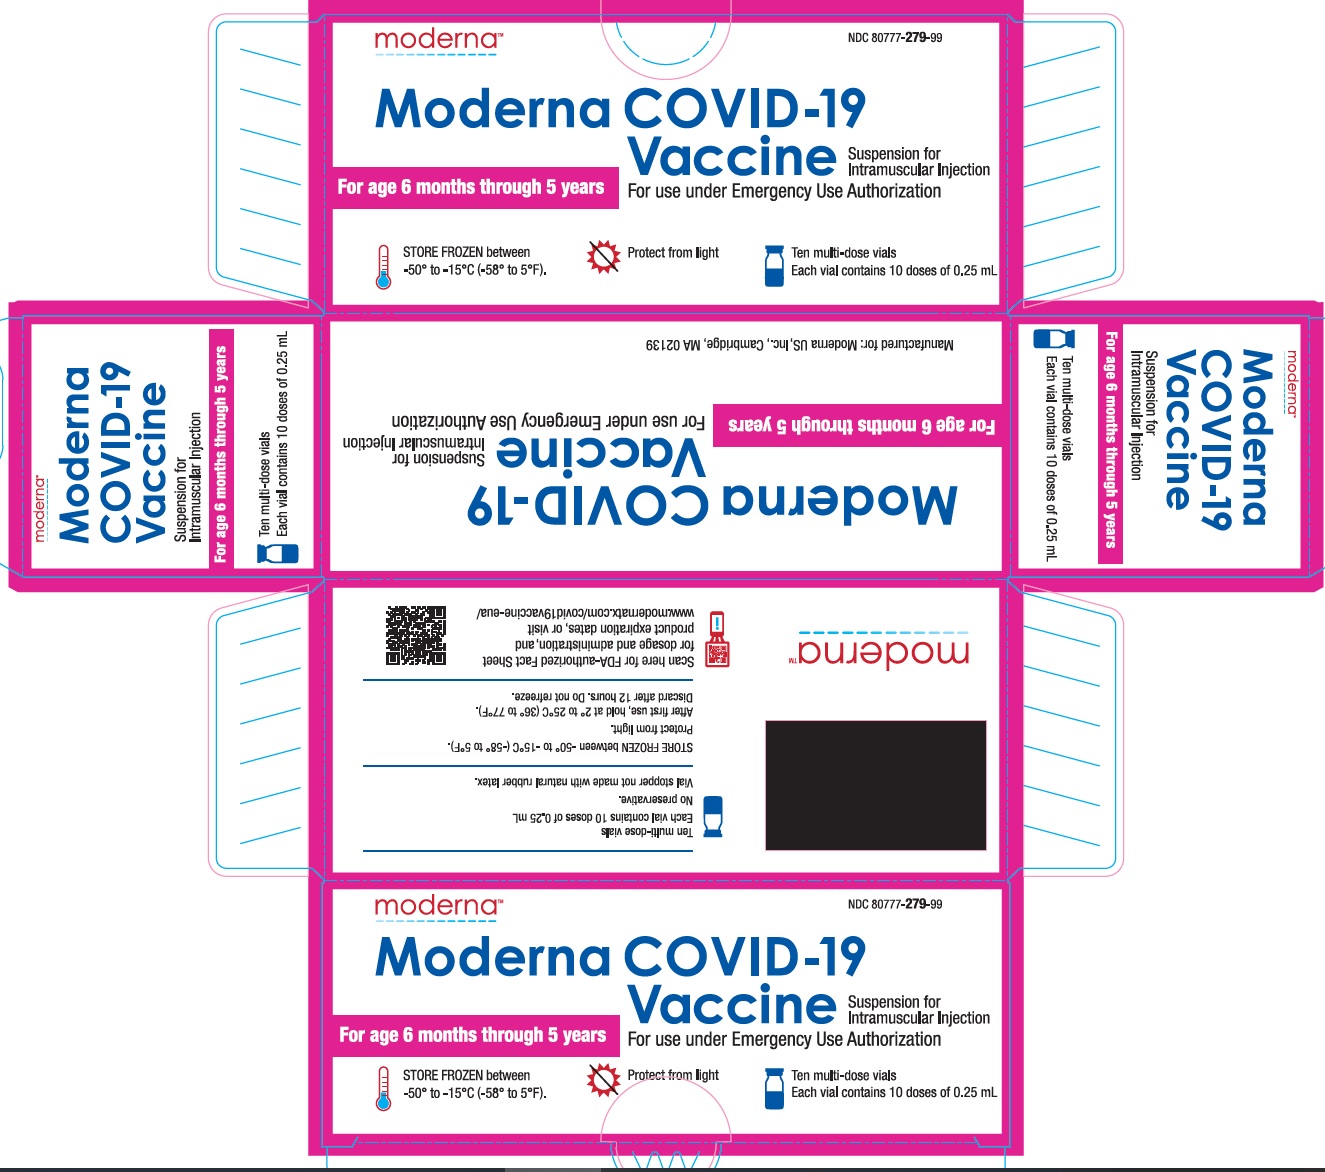 Moderna COVID-19 Vaccine Suspension for Intramuscular Injection for use under Emergency Use Authorization-Age 6mo through 5y Multi-Dose Vial Label (10 doses of 0.25 mL)